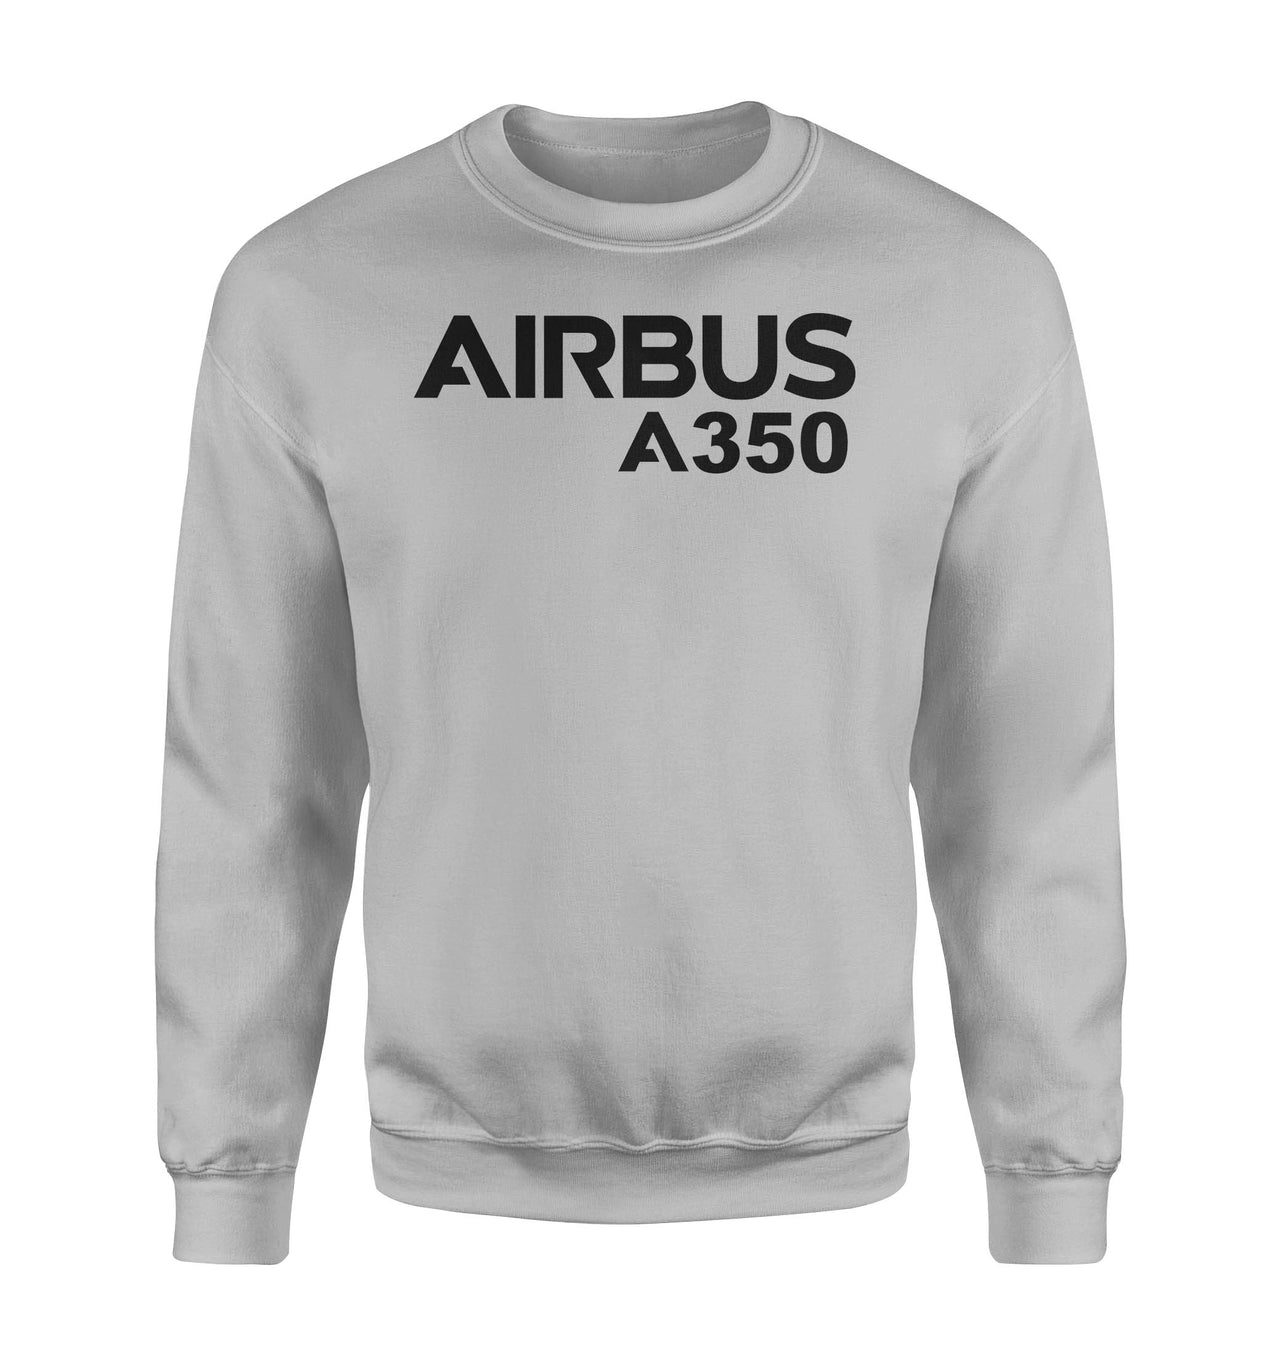 Airbus A350 & Text Designed Sweatshirts